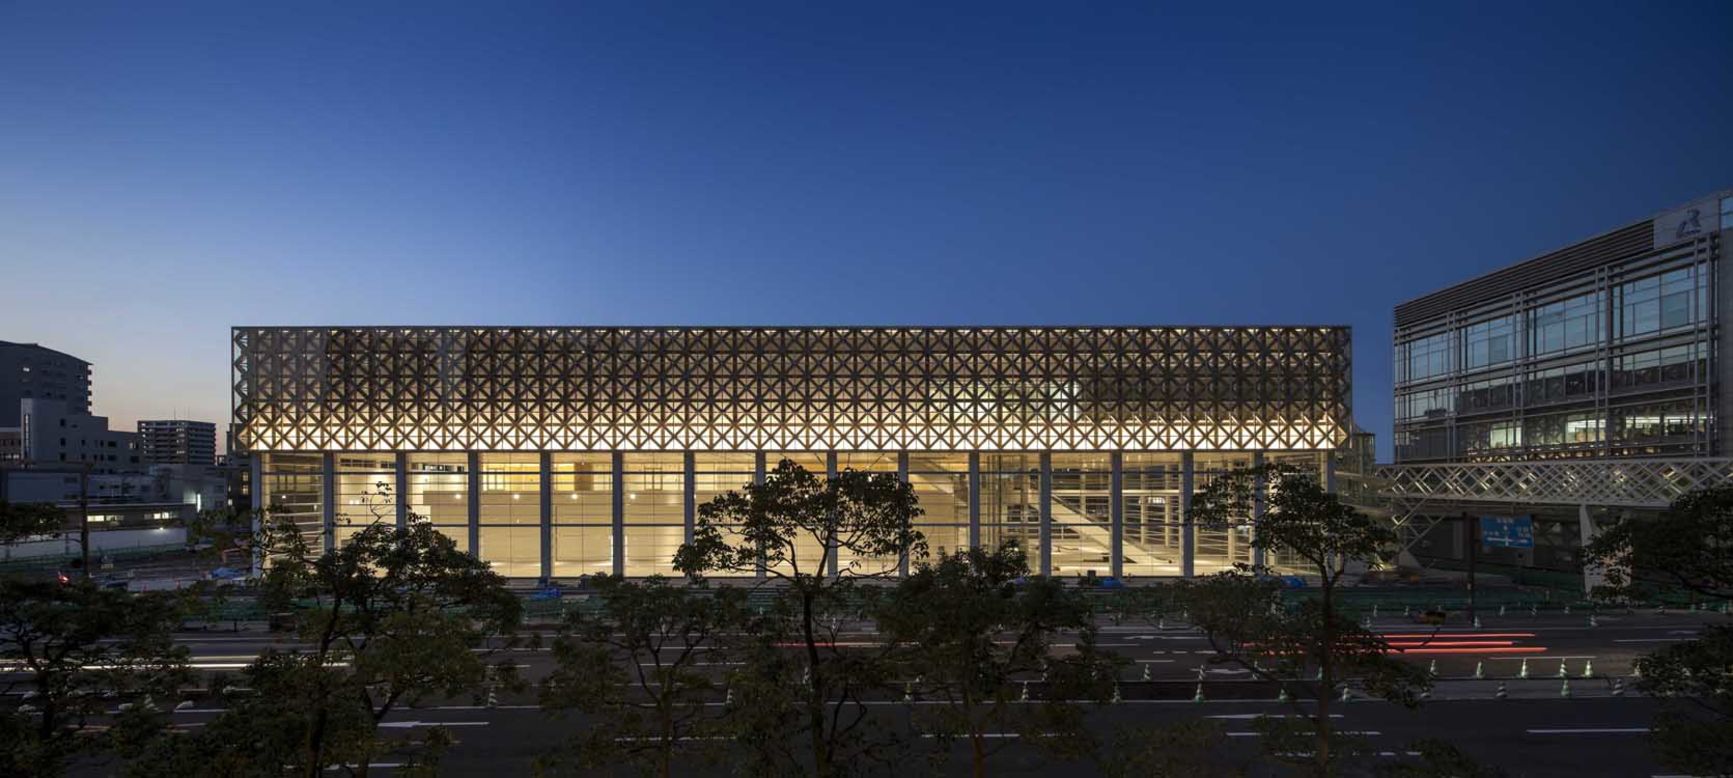 <a href="http://www.shigerubanarchitects.com/" target="_blank" target="_blank">Shigeru Ban</a>'s Oita Prefectural Art Museum is nearing completion. Situated on the southern Japanese island of Kyushu, it will open to the public <a href="http://www.pref.oita.jp/site/tourism/oita-pref-art-museum.html" target="_blank" target="_blank">this Spring</a>, with a diverse program across disciplines, from food to art and ballet.